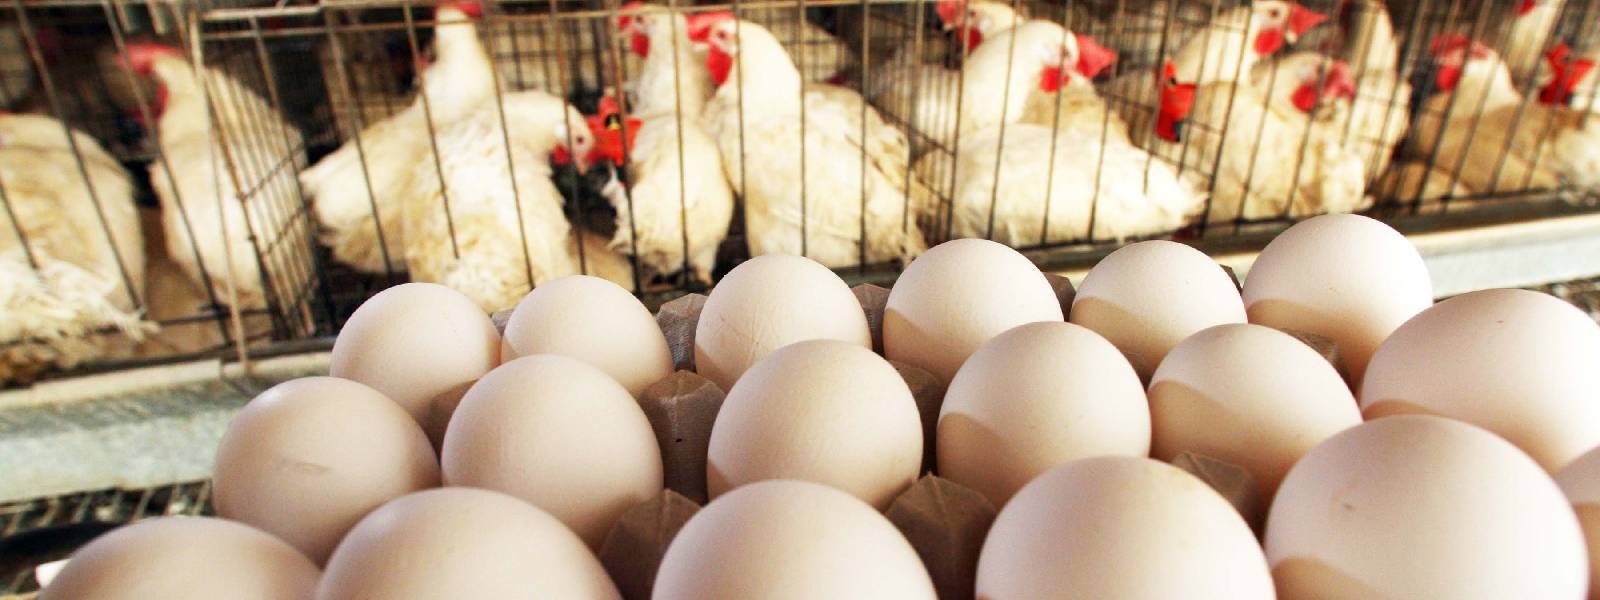 Prices of Chicken & Eggs cannot be lowered: State Minister